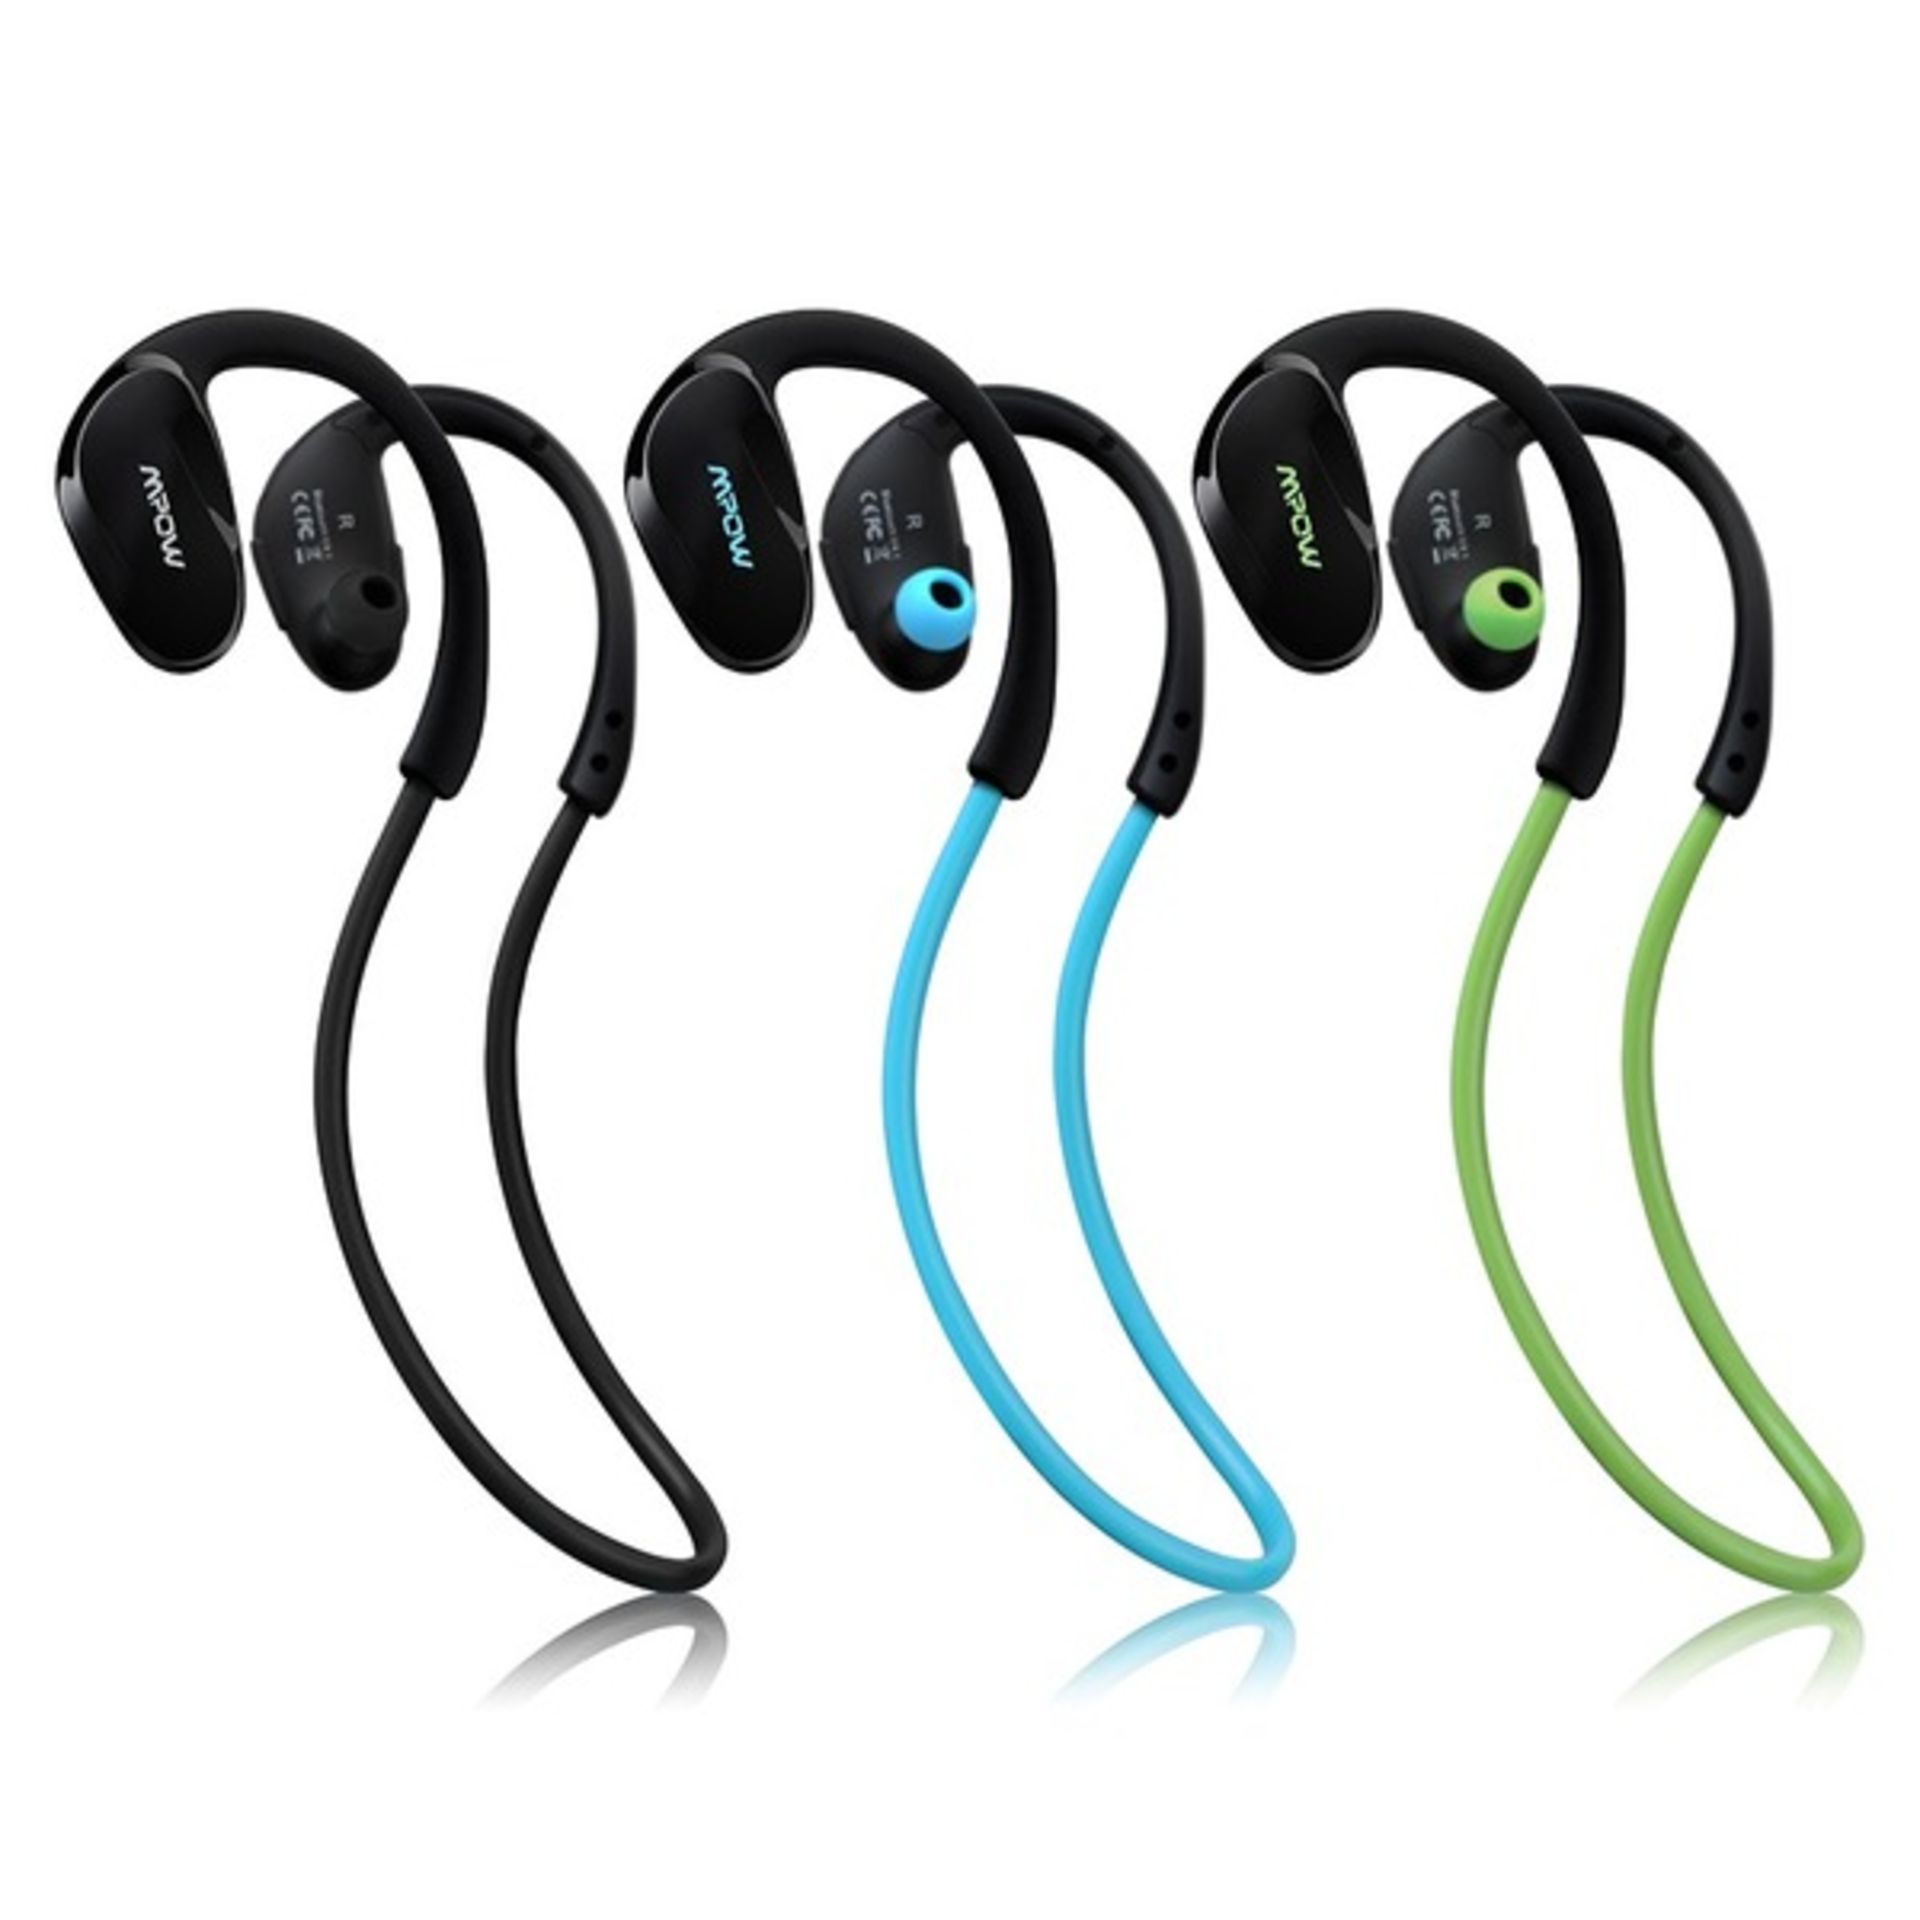 V Grade U Pair of Bluetooth Earphones/Headset (All Boxed) - Colours and Styles/Makes May Vary - Some - Image 3 of 7